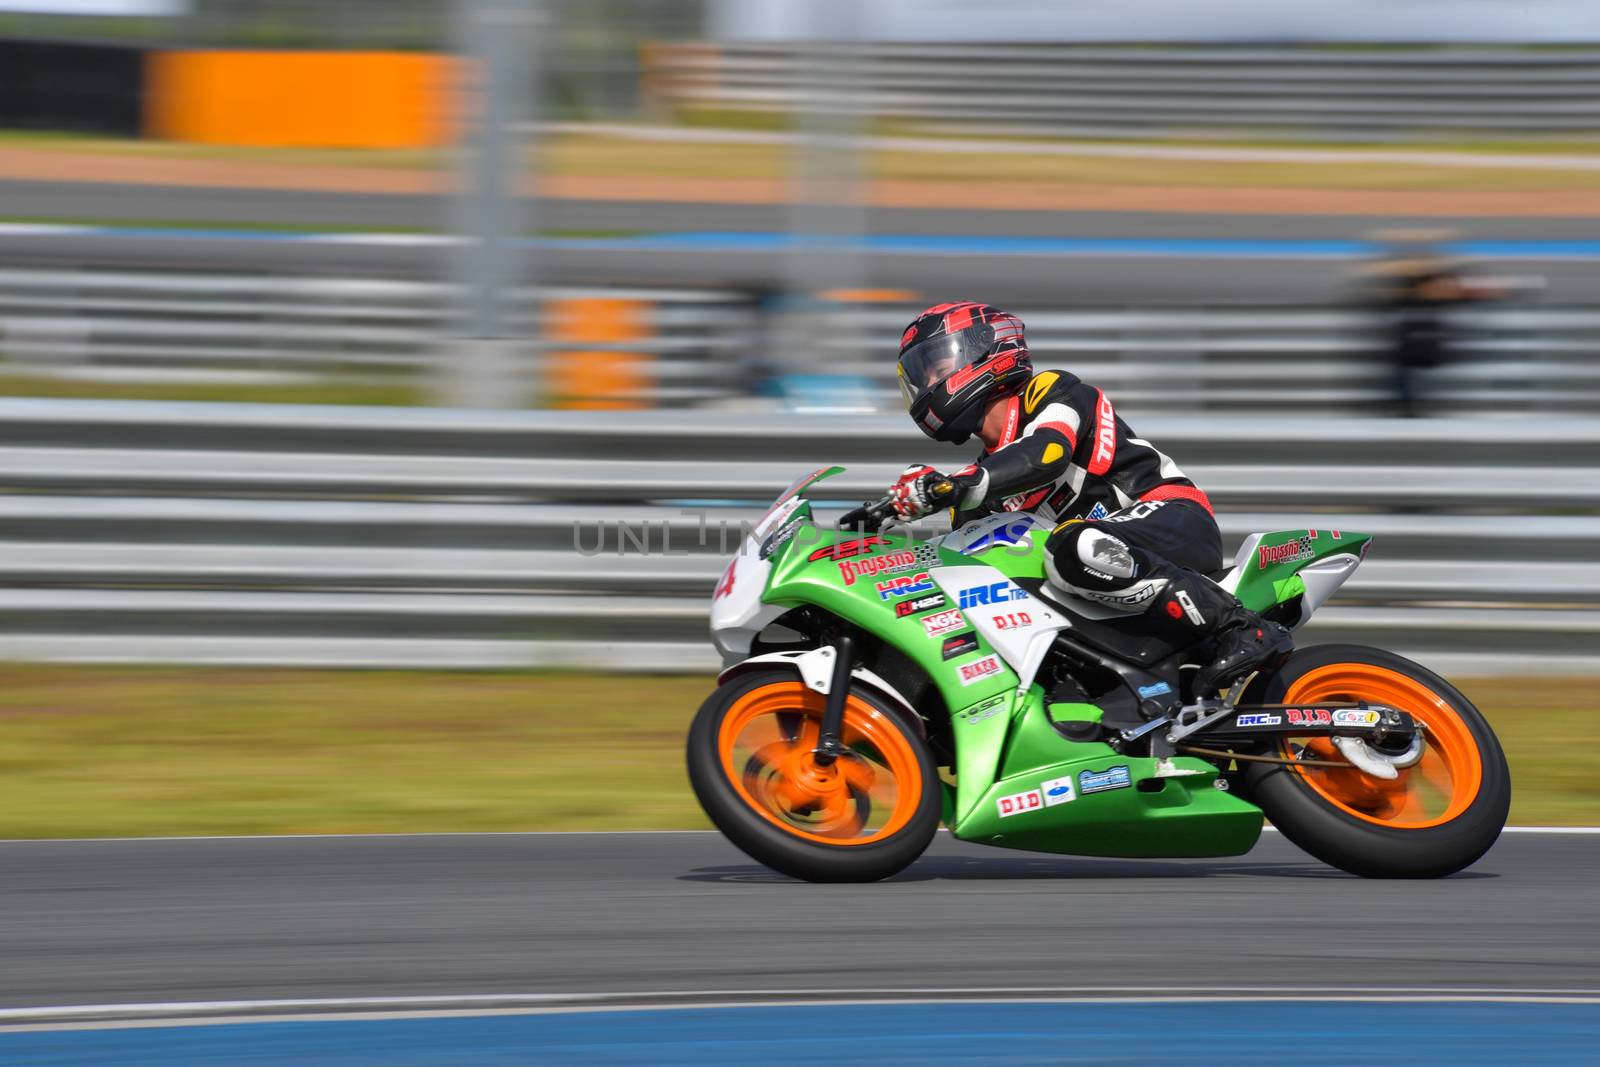 BURIRAM - DECEMBER 4 : THaned Boonruang of Thailand with Honda CBR300R motorcycle of CBR300R Thailand Dream Cup in Asia Road Racing Championship 2016 Round 6 at Chang International Racing Circuit on December 4, 2016, Buriram, Thailand.